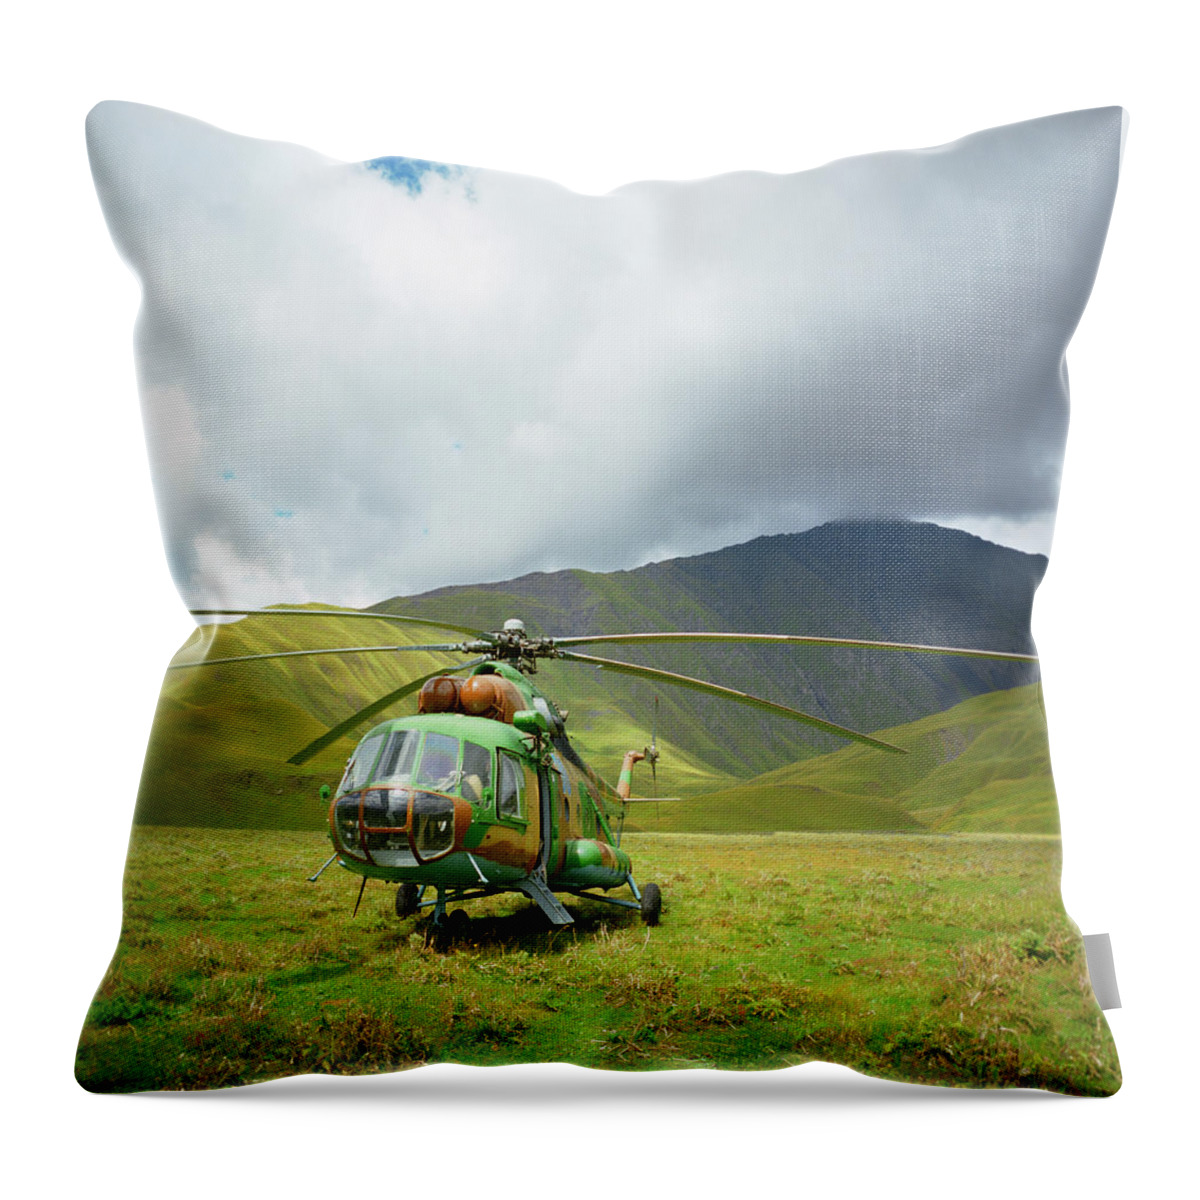 Scenics Throw Pillow featuring the photograph Helicopter In The Mountains Of Tusheti by Silvia Otte